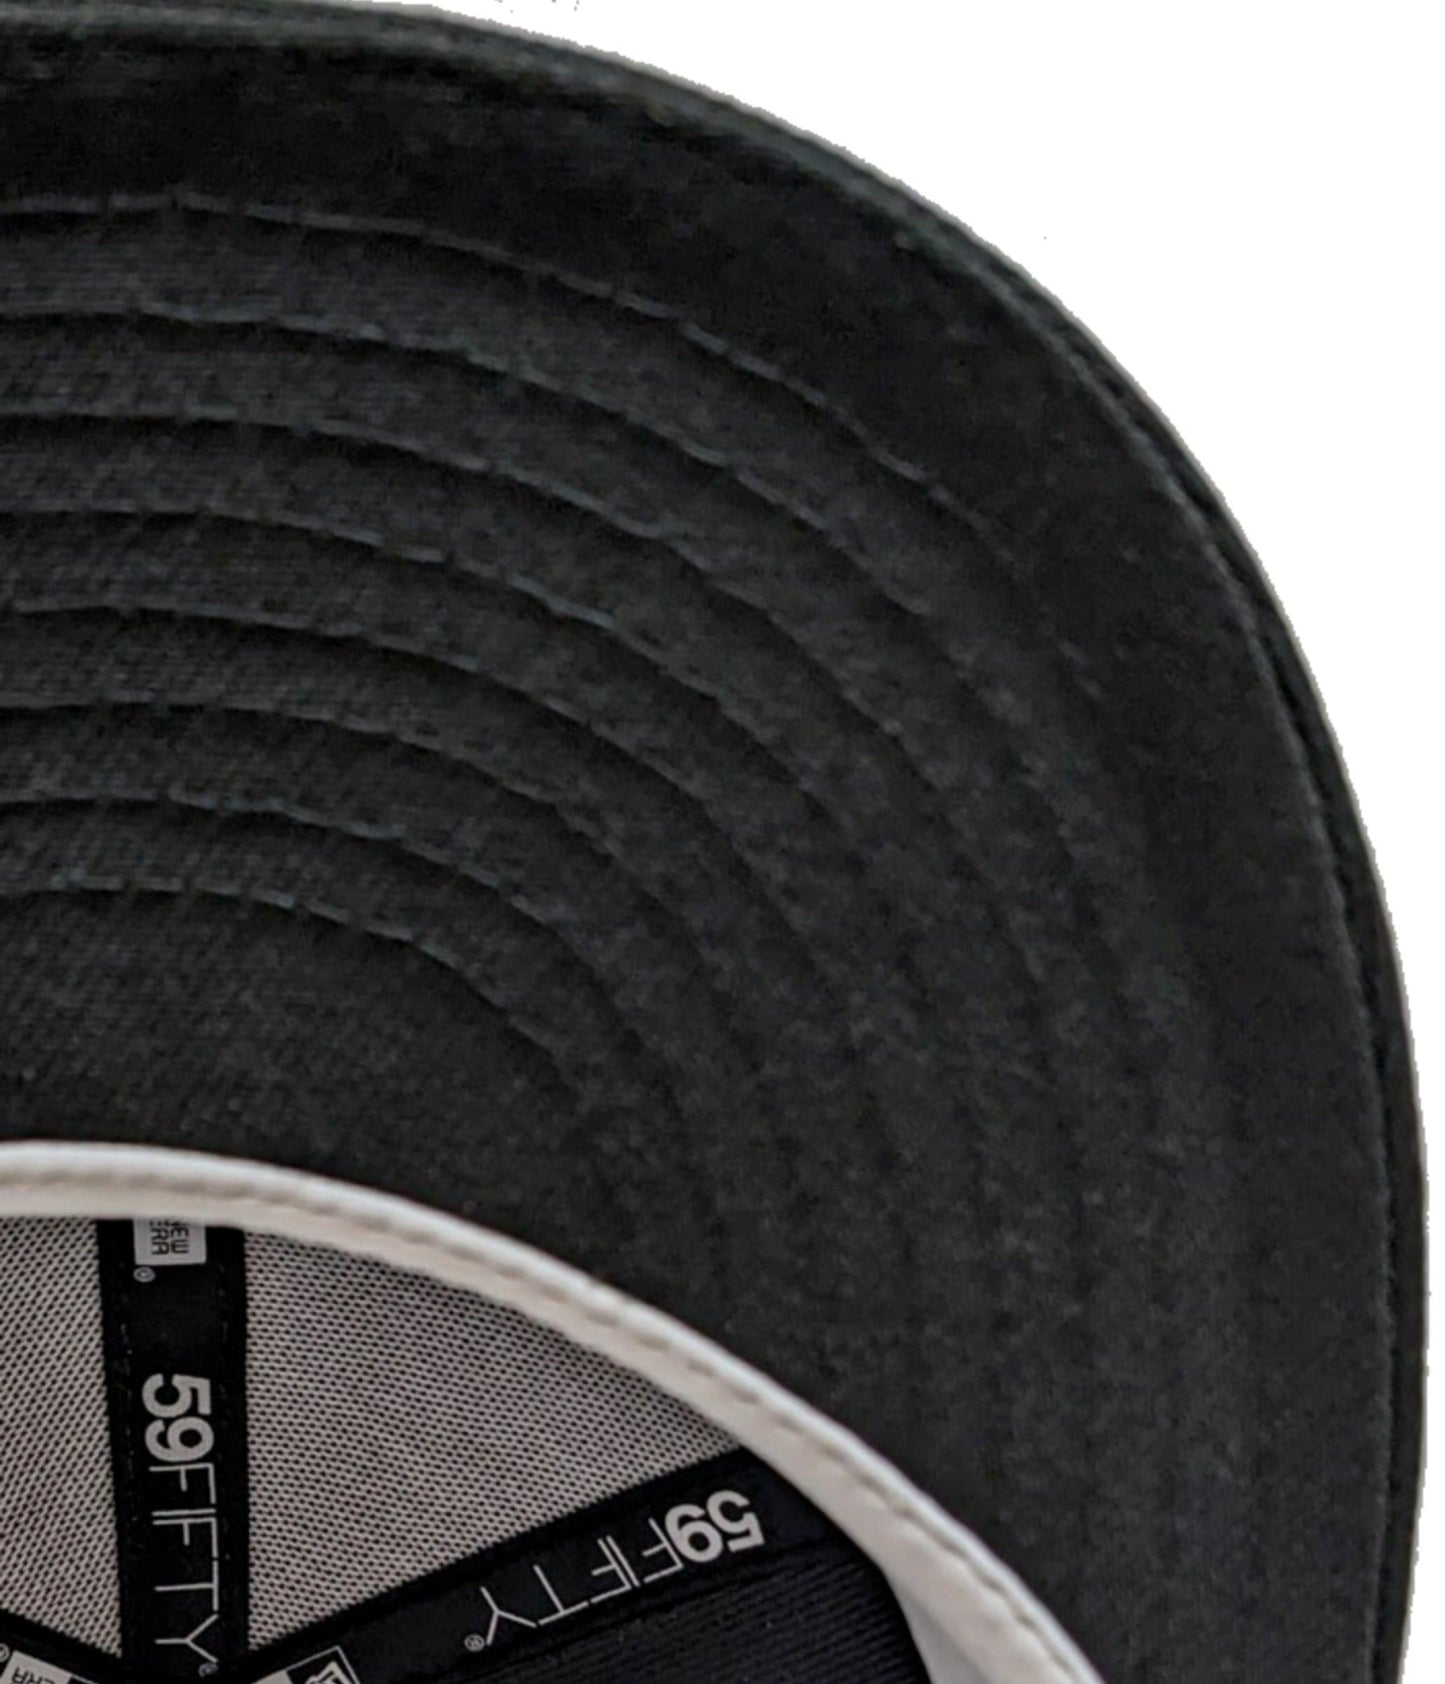 Chicago White Sox Graphite/Black New Era Script 59FIFTY Fitted Hat